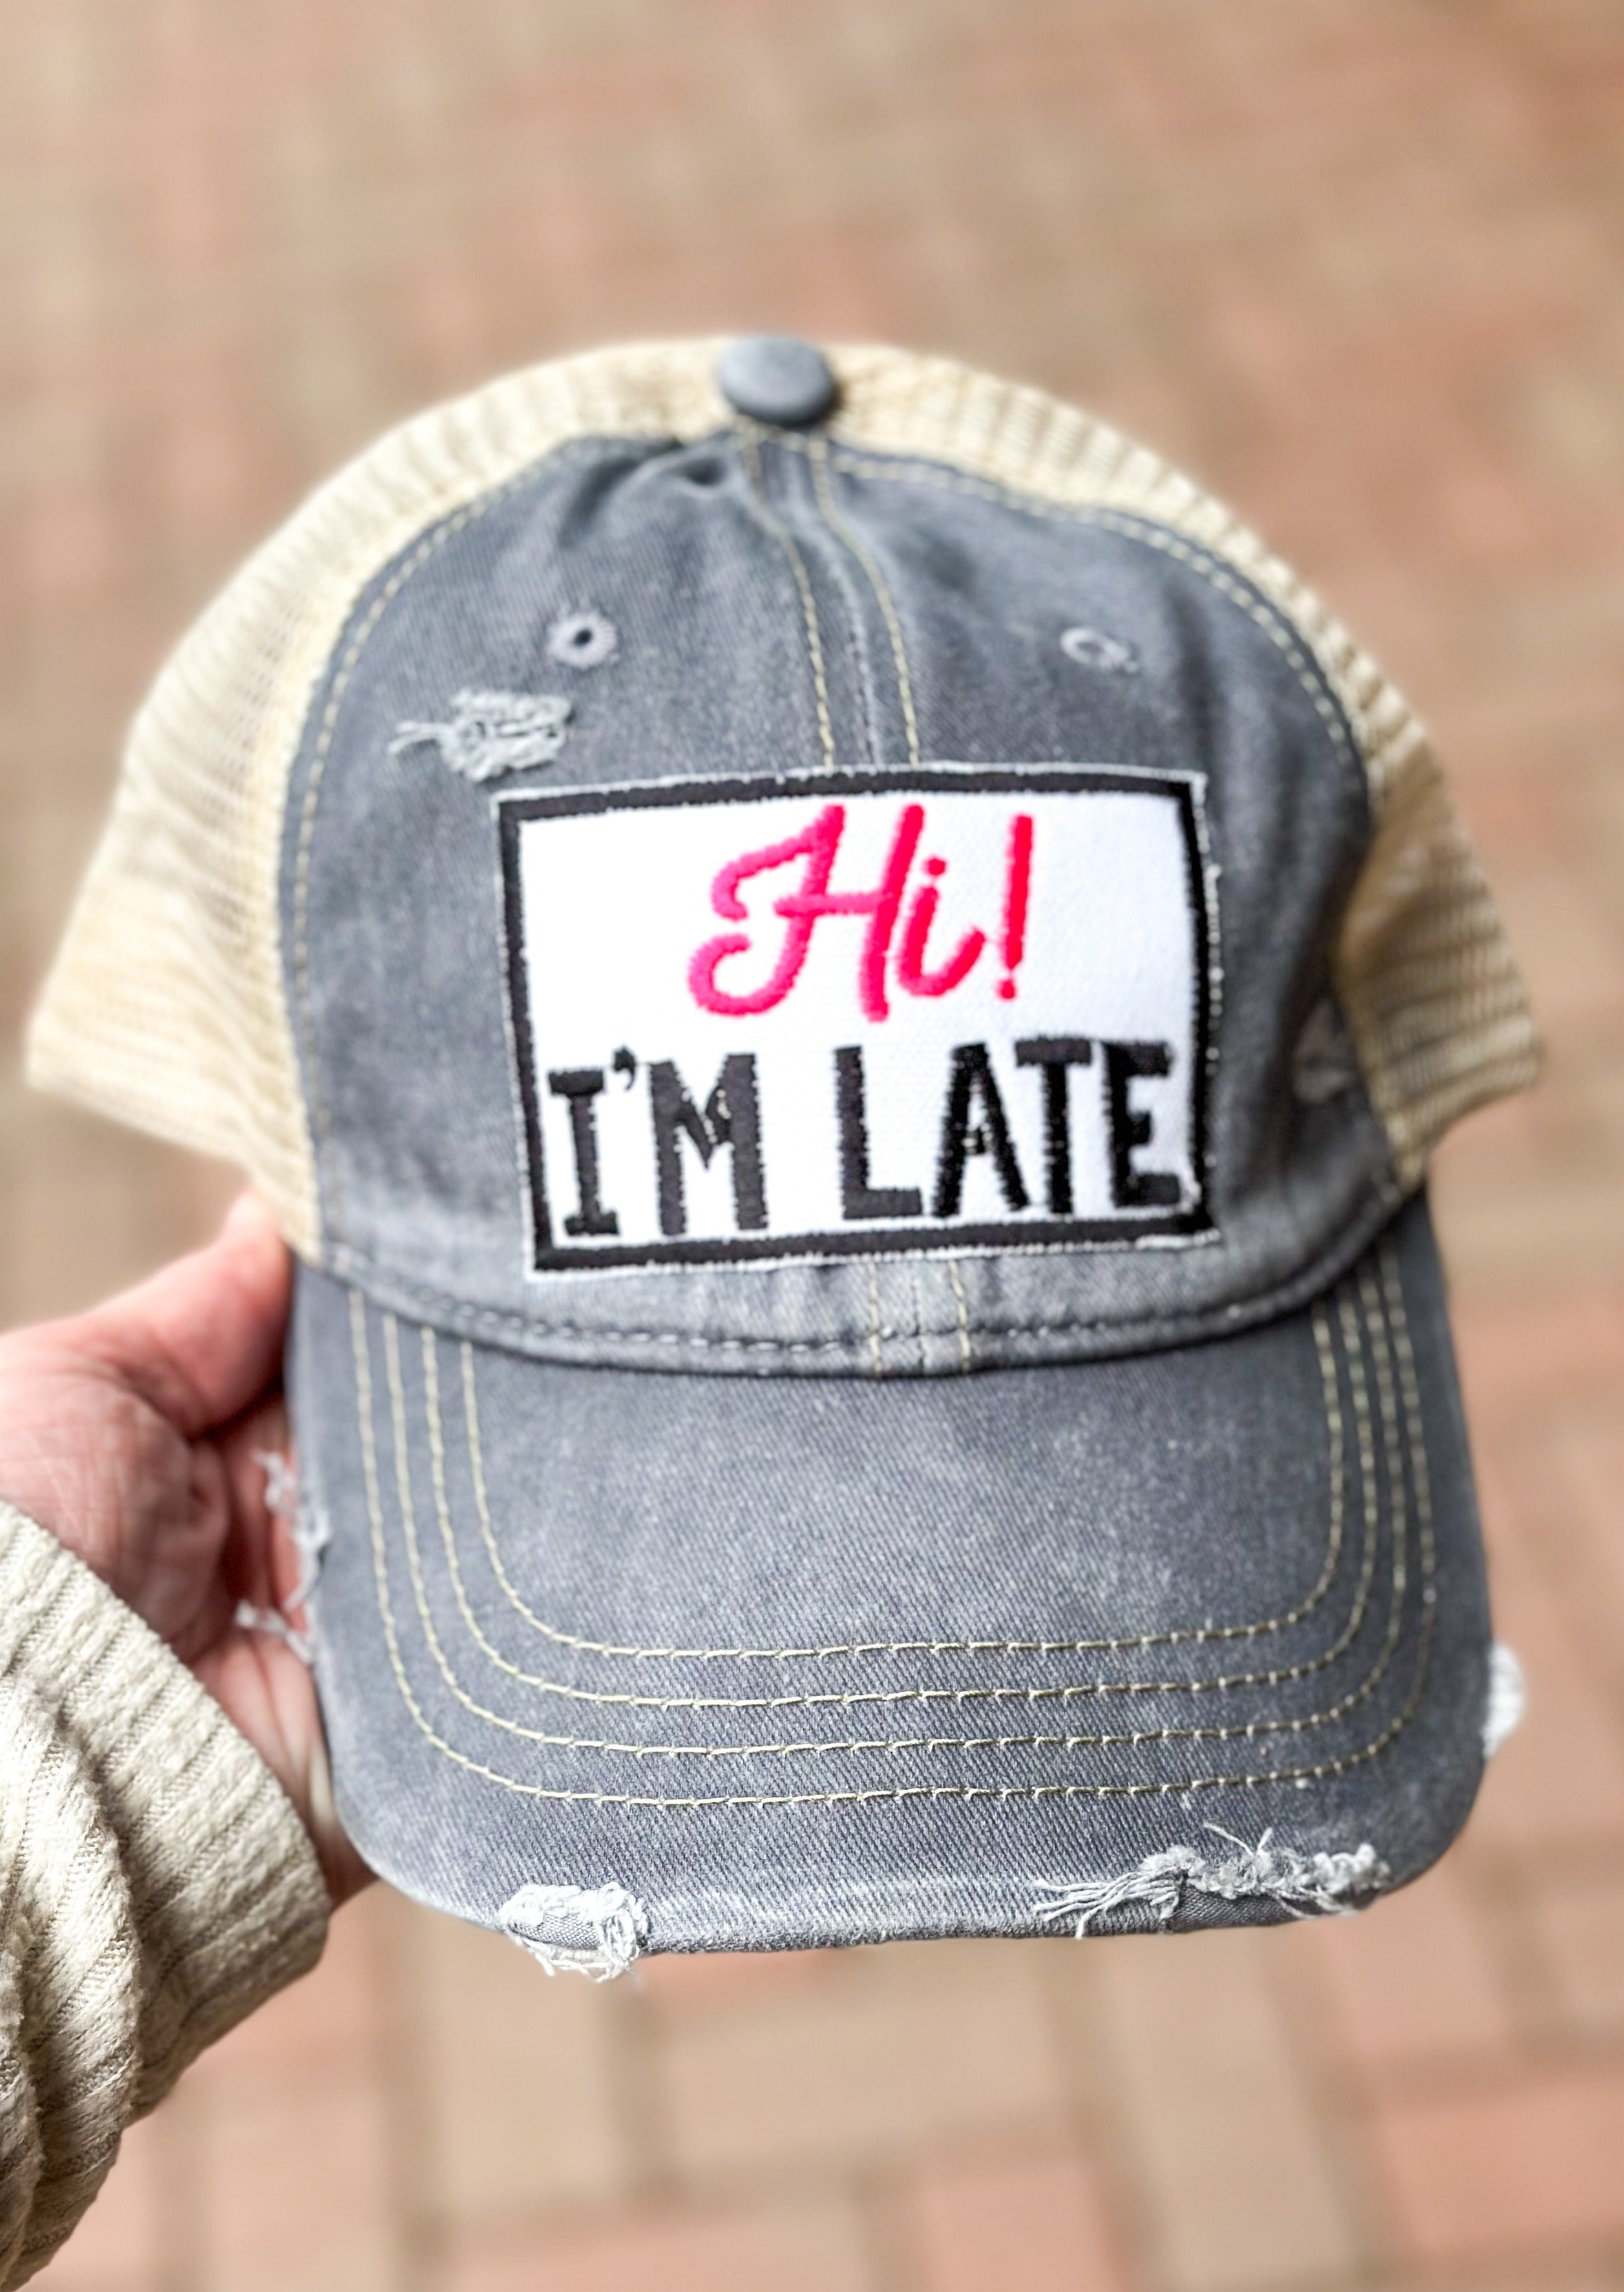 Gray distressed trucker hat with patch that says "Hi!" in hot pink and "I'm Late" in black